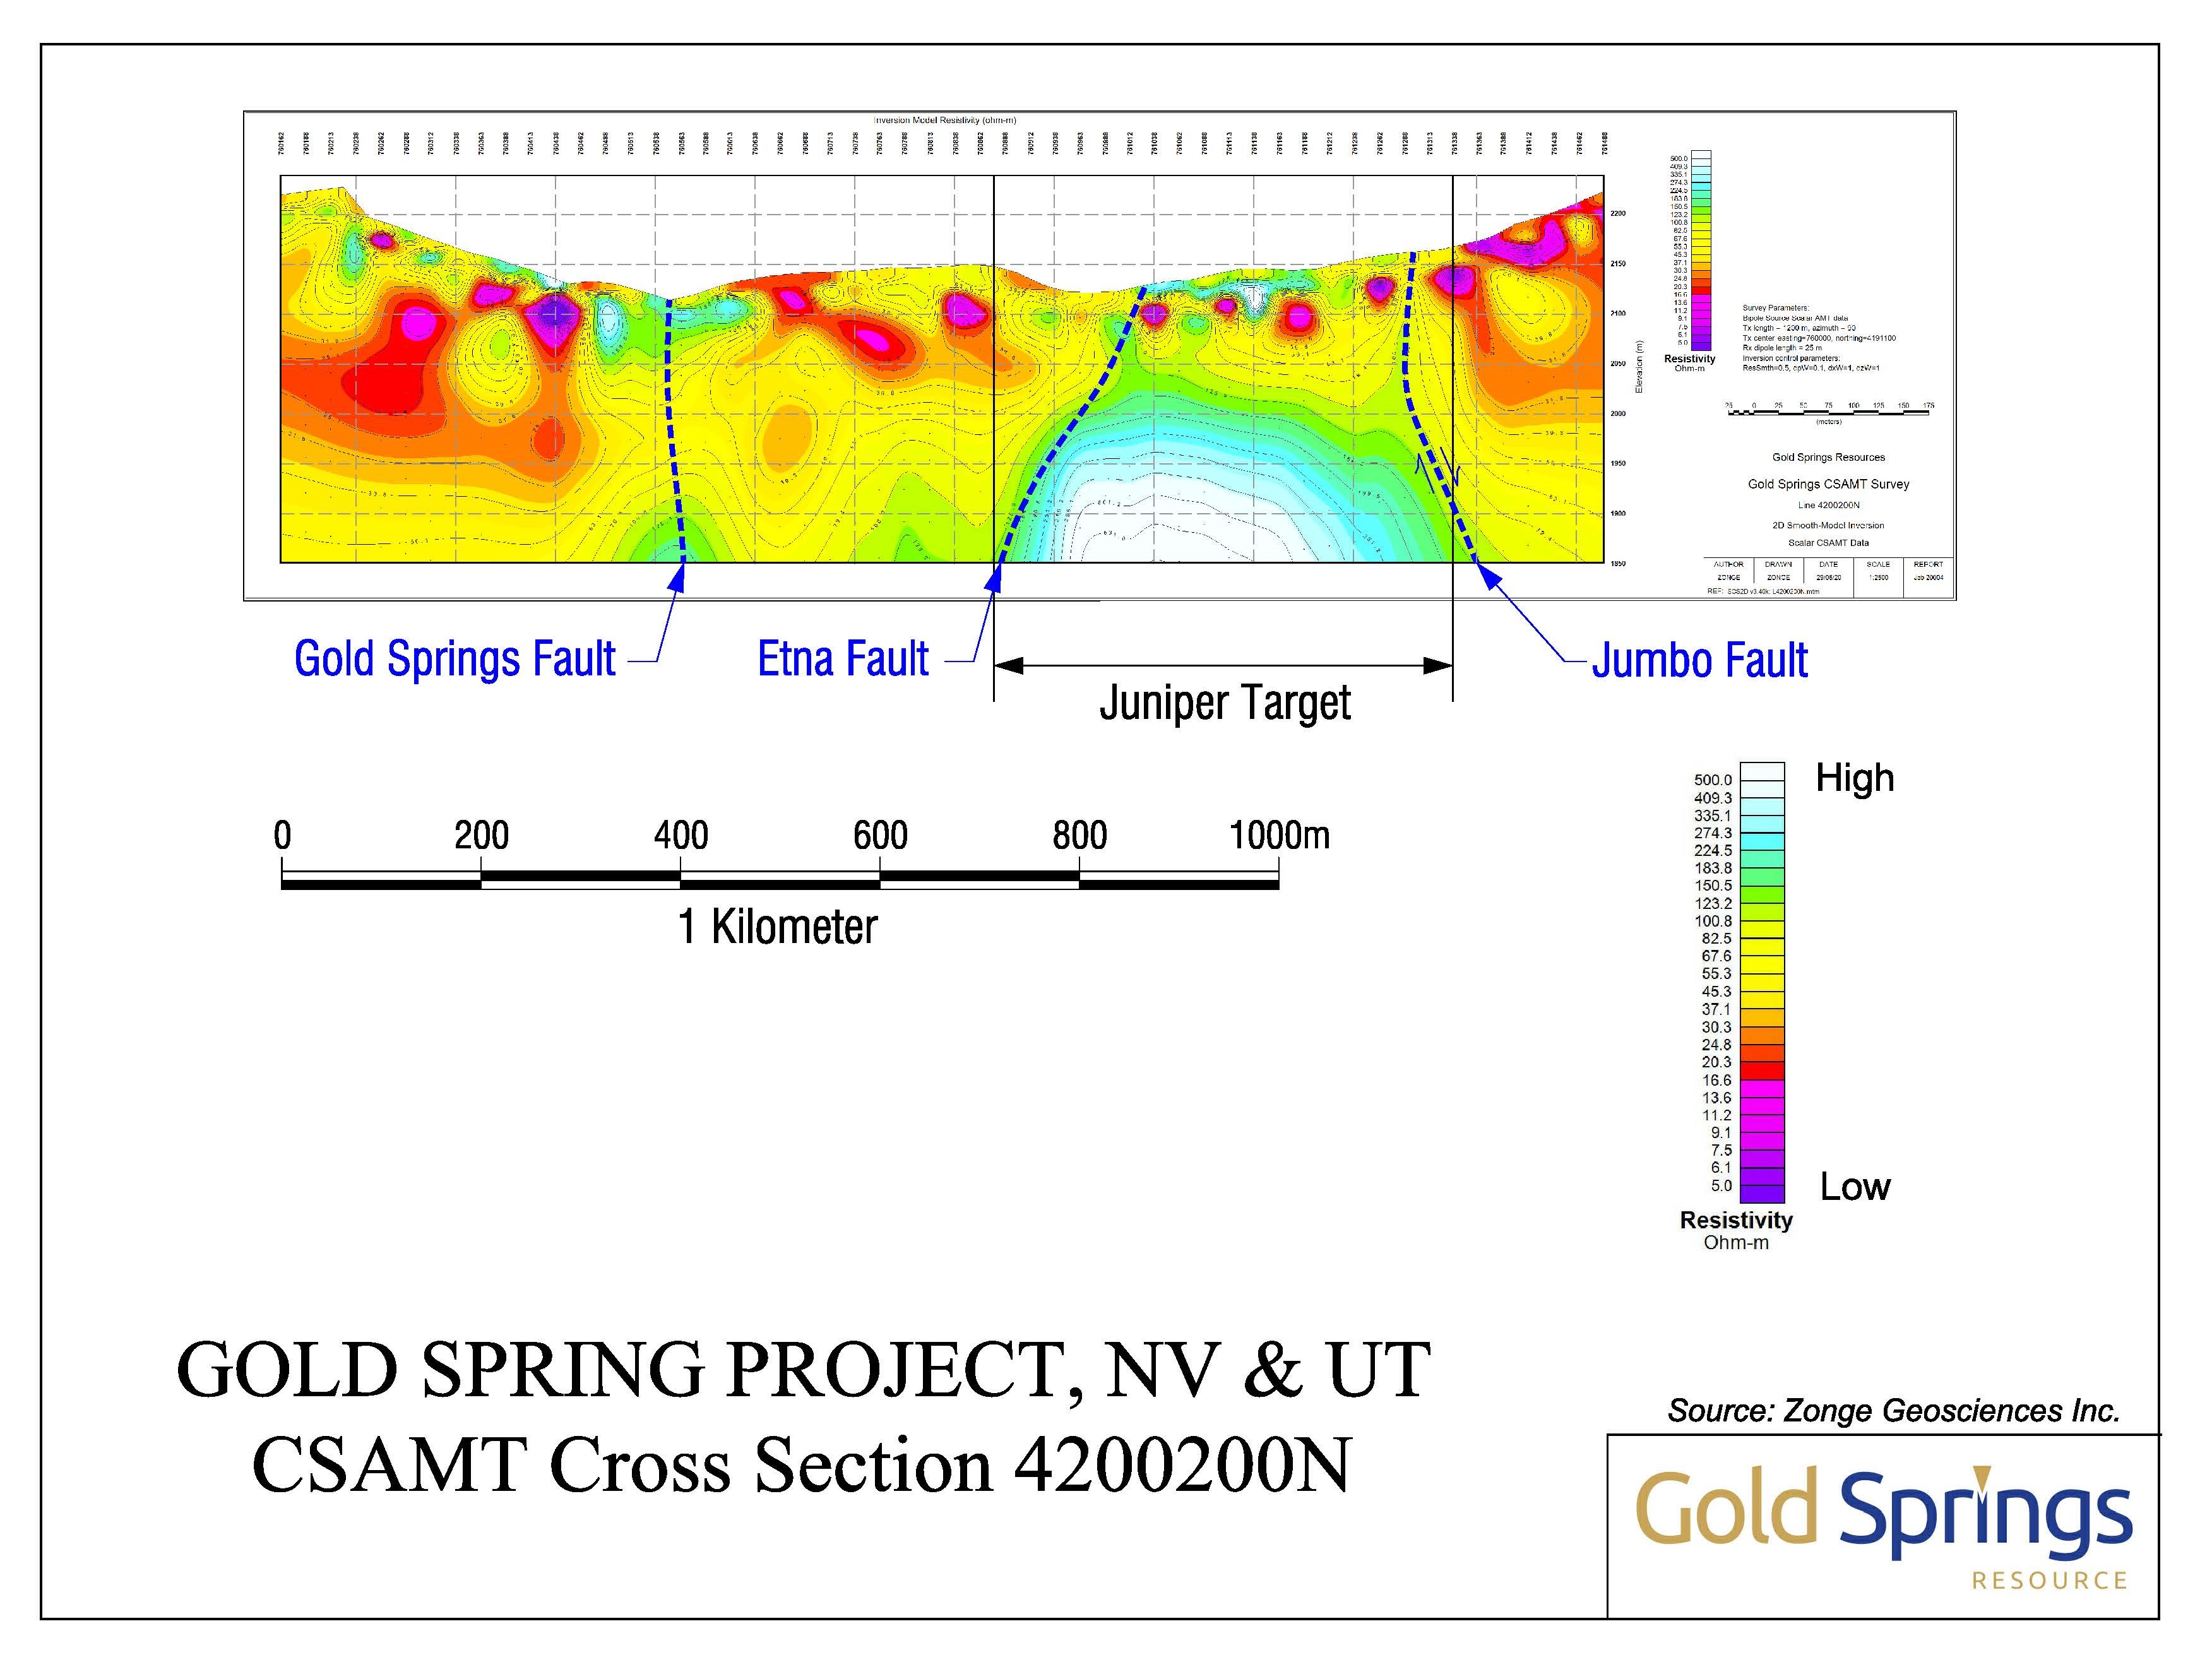 Gold Springs Resources Corporation, Wednesday, September 2, 2020, Press release picture